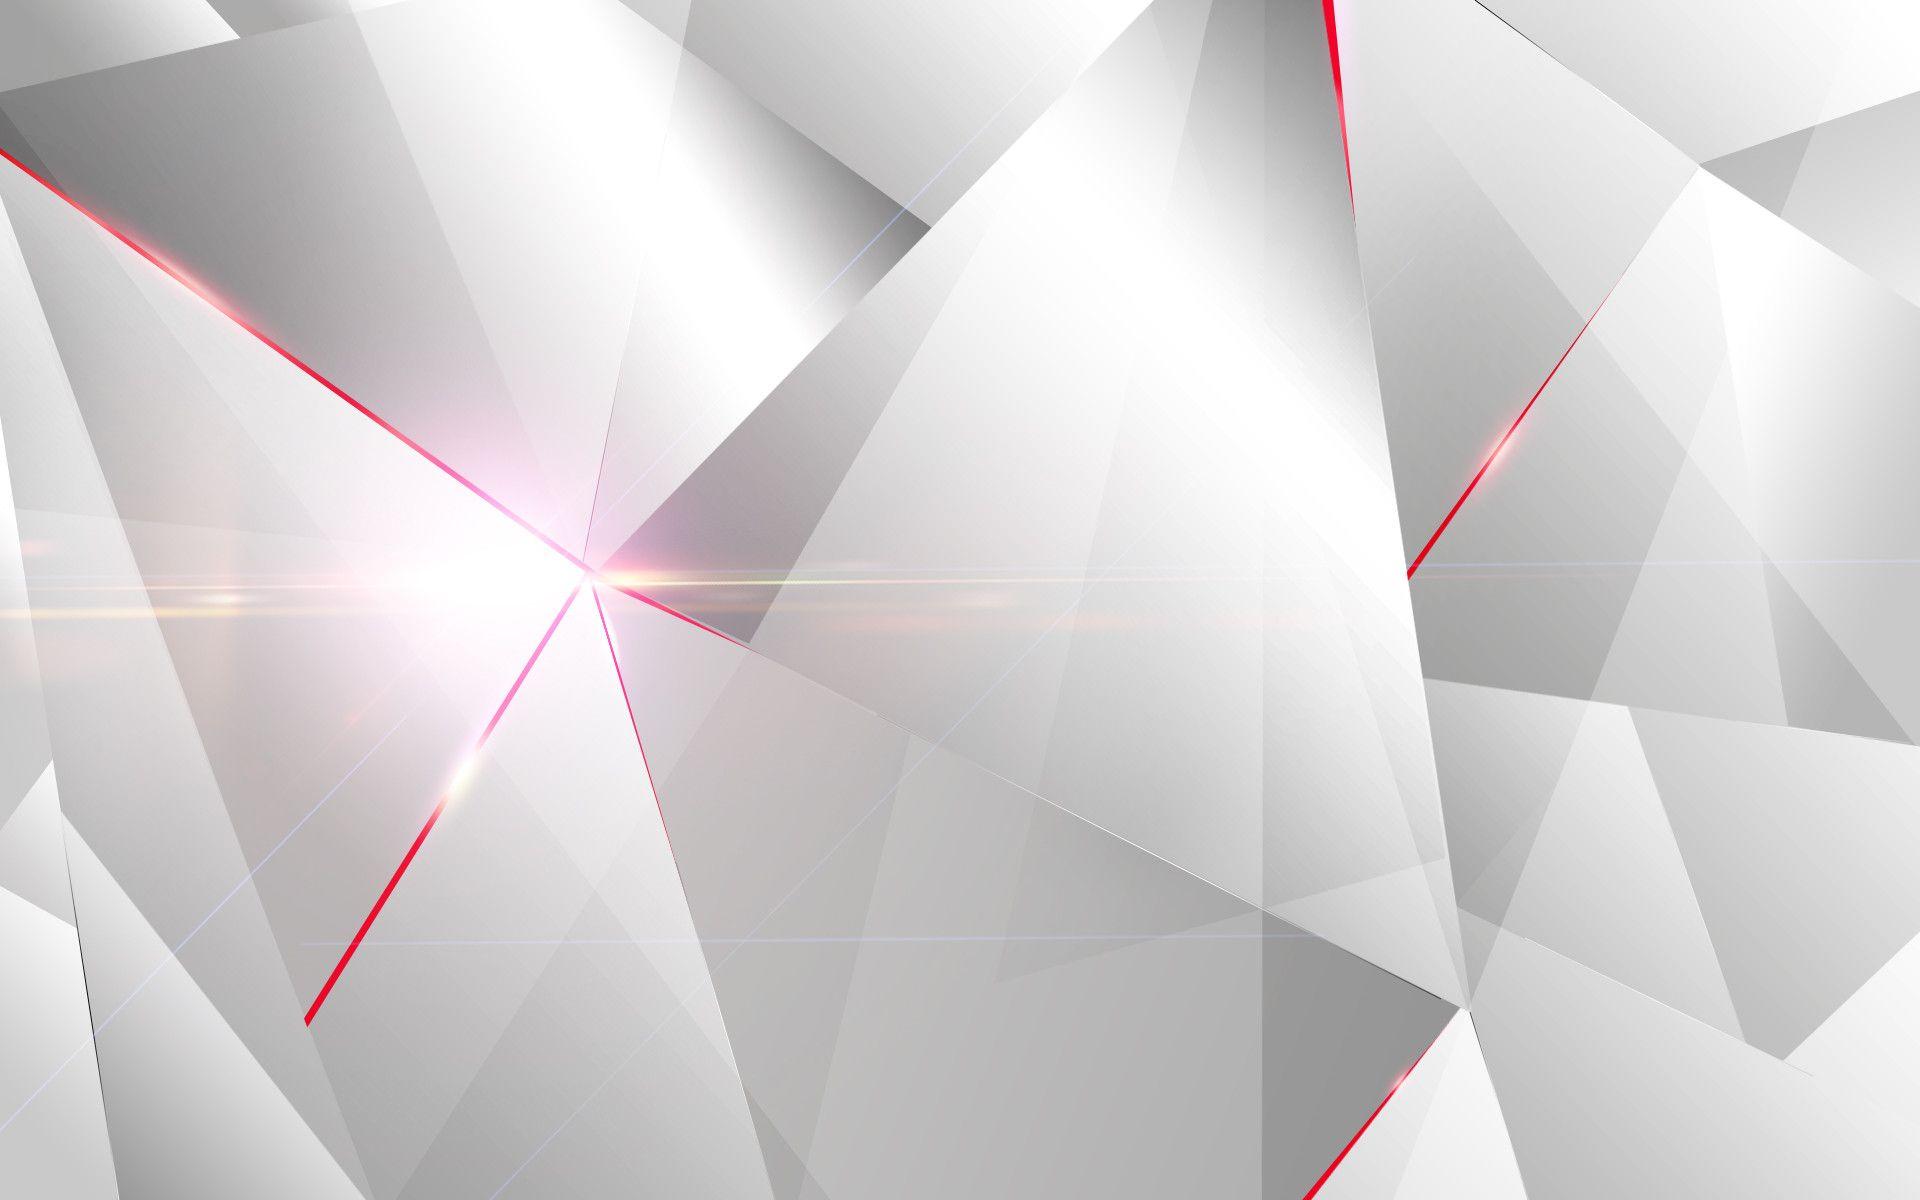 BEHIND WHITE abstract triangle wallpaper